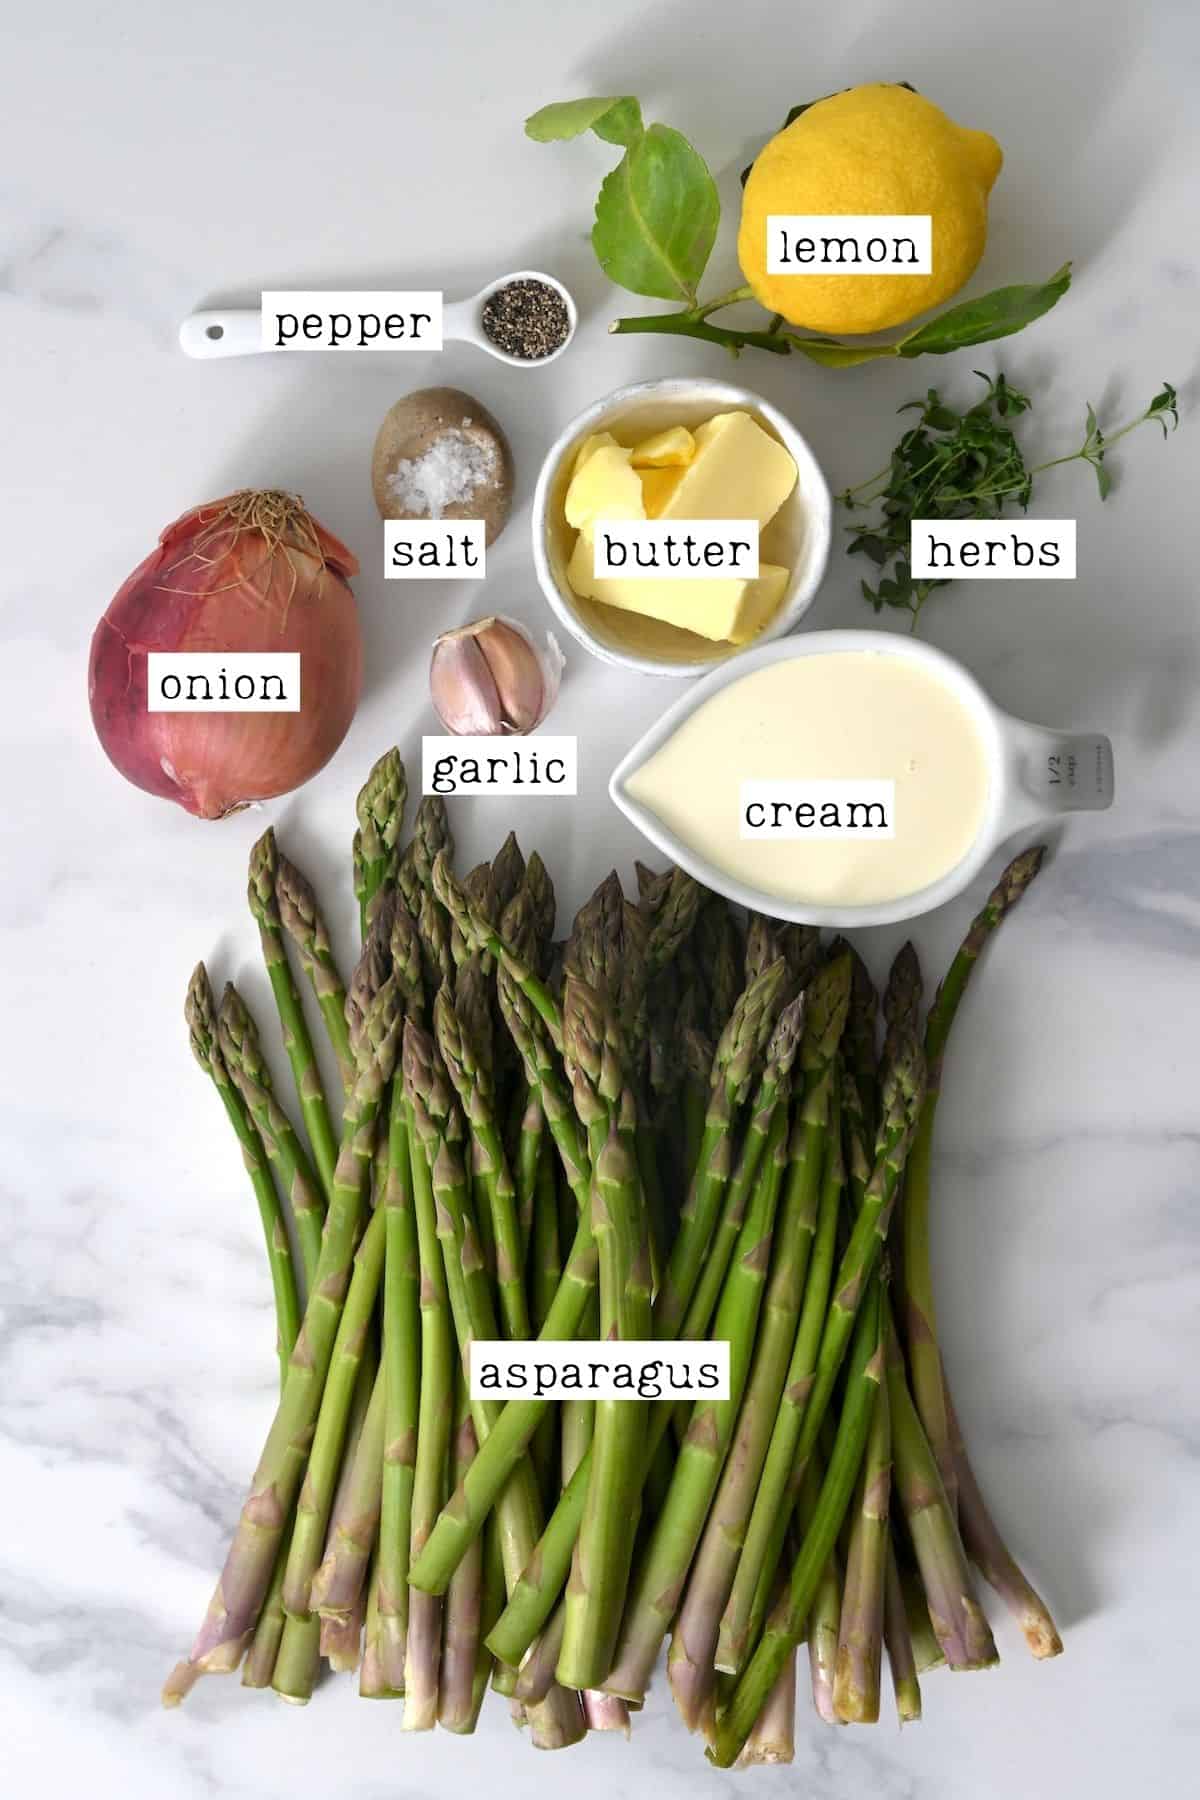 Ingredients for asparagus soup